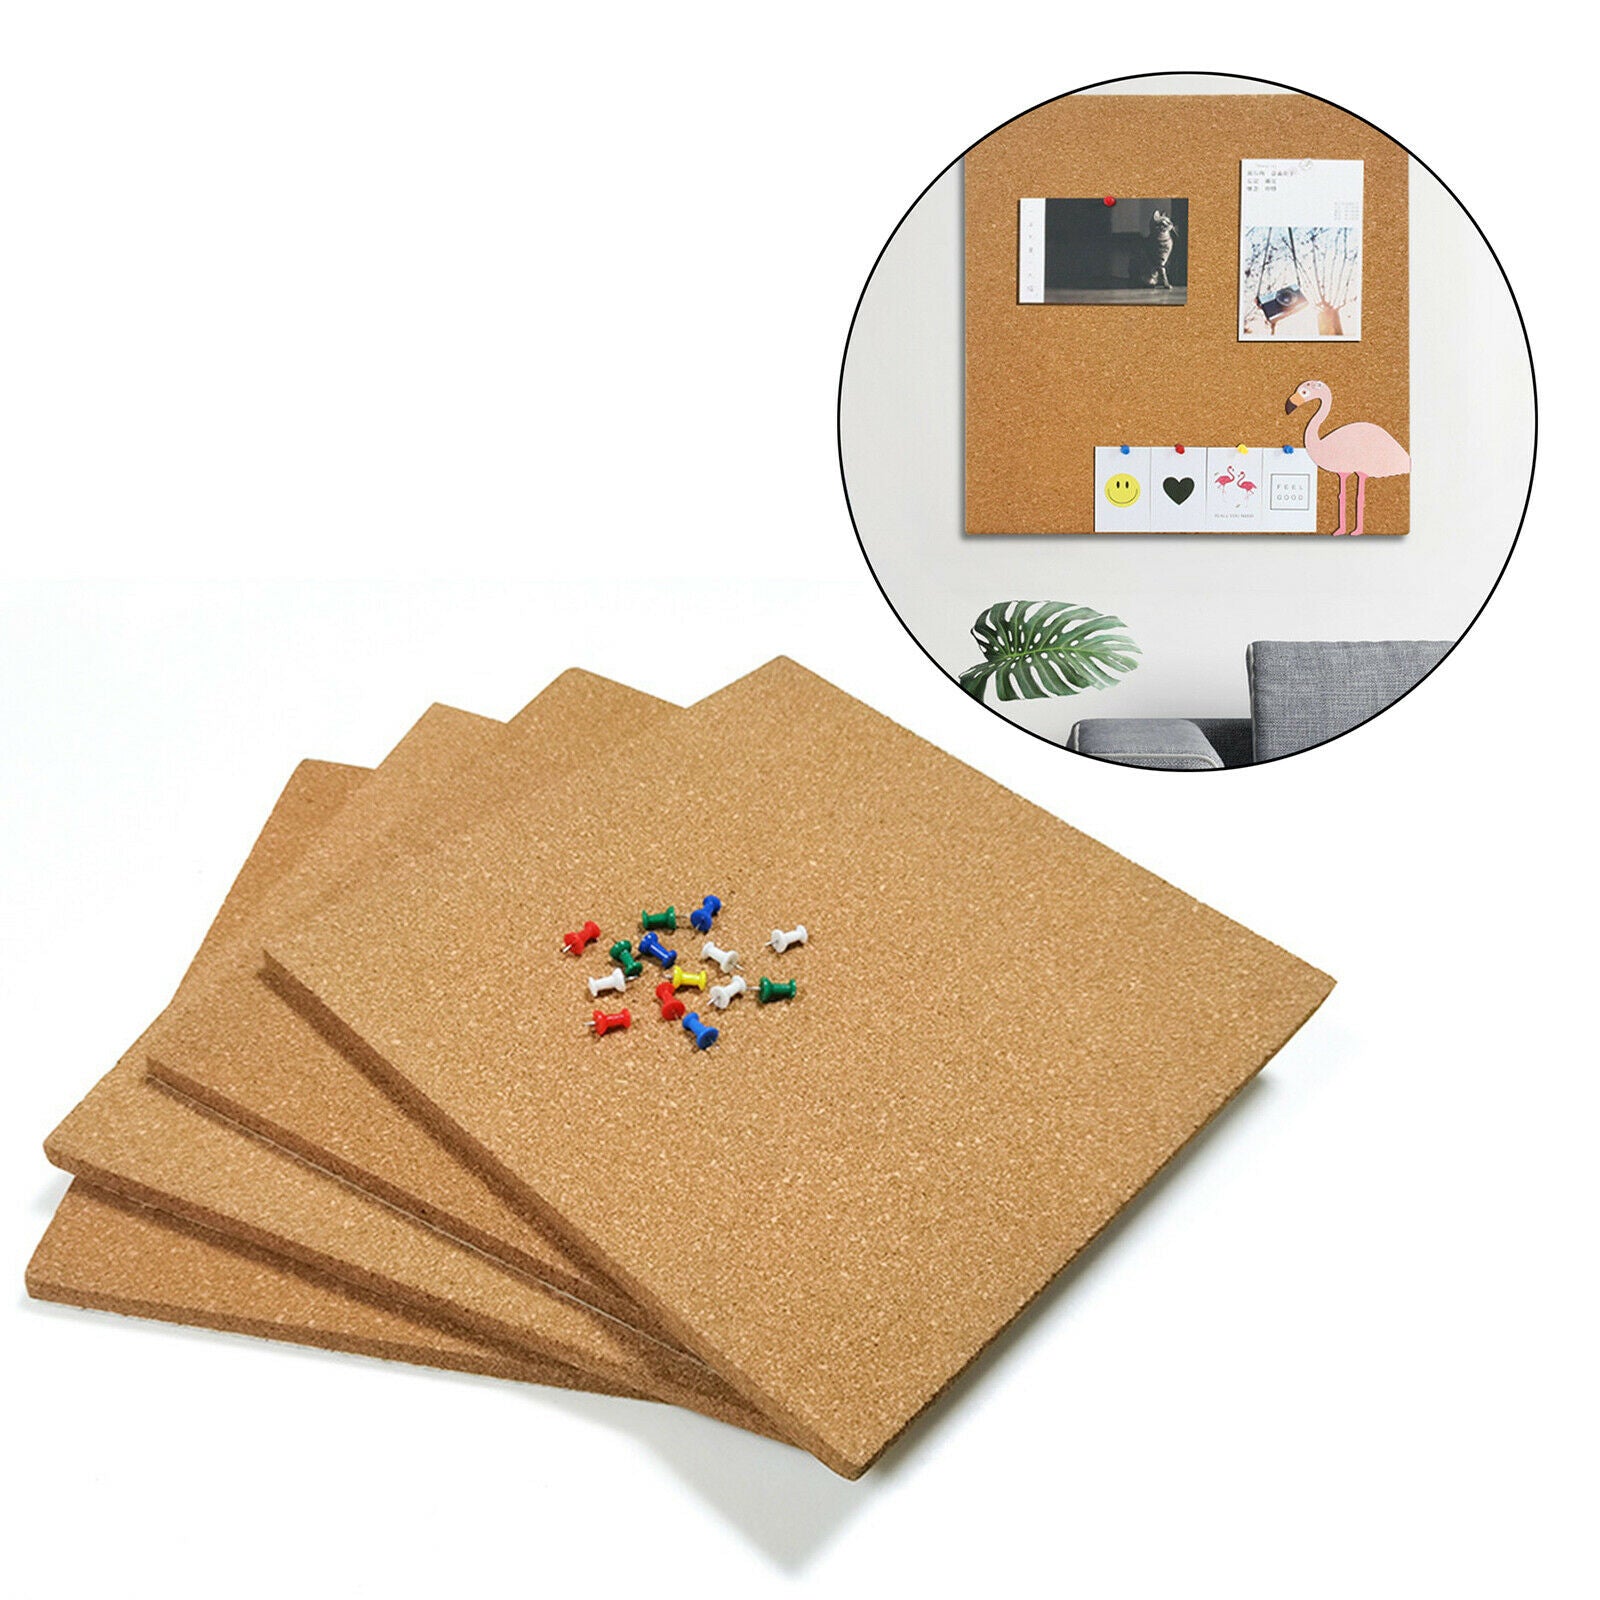 4Pcs Cork Board 12"x12" Adhesive Backing Home Office Memo Notice Pin Boards